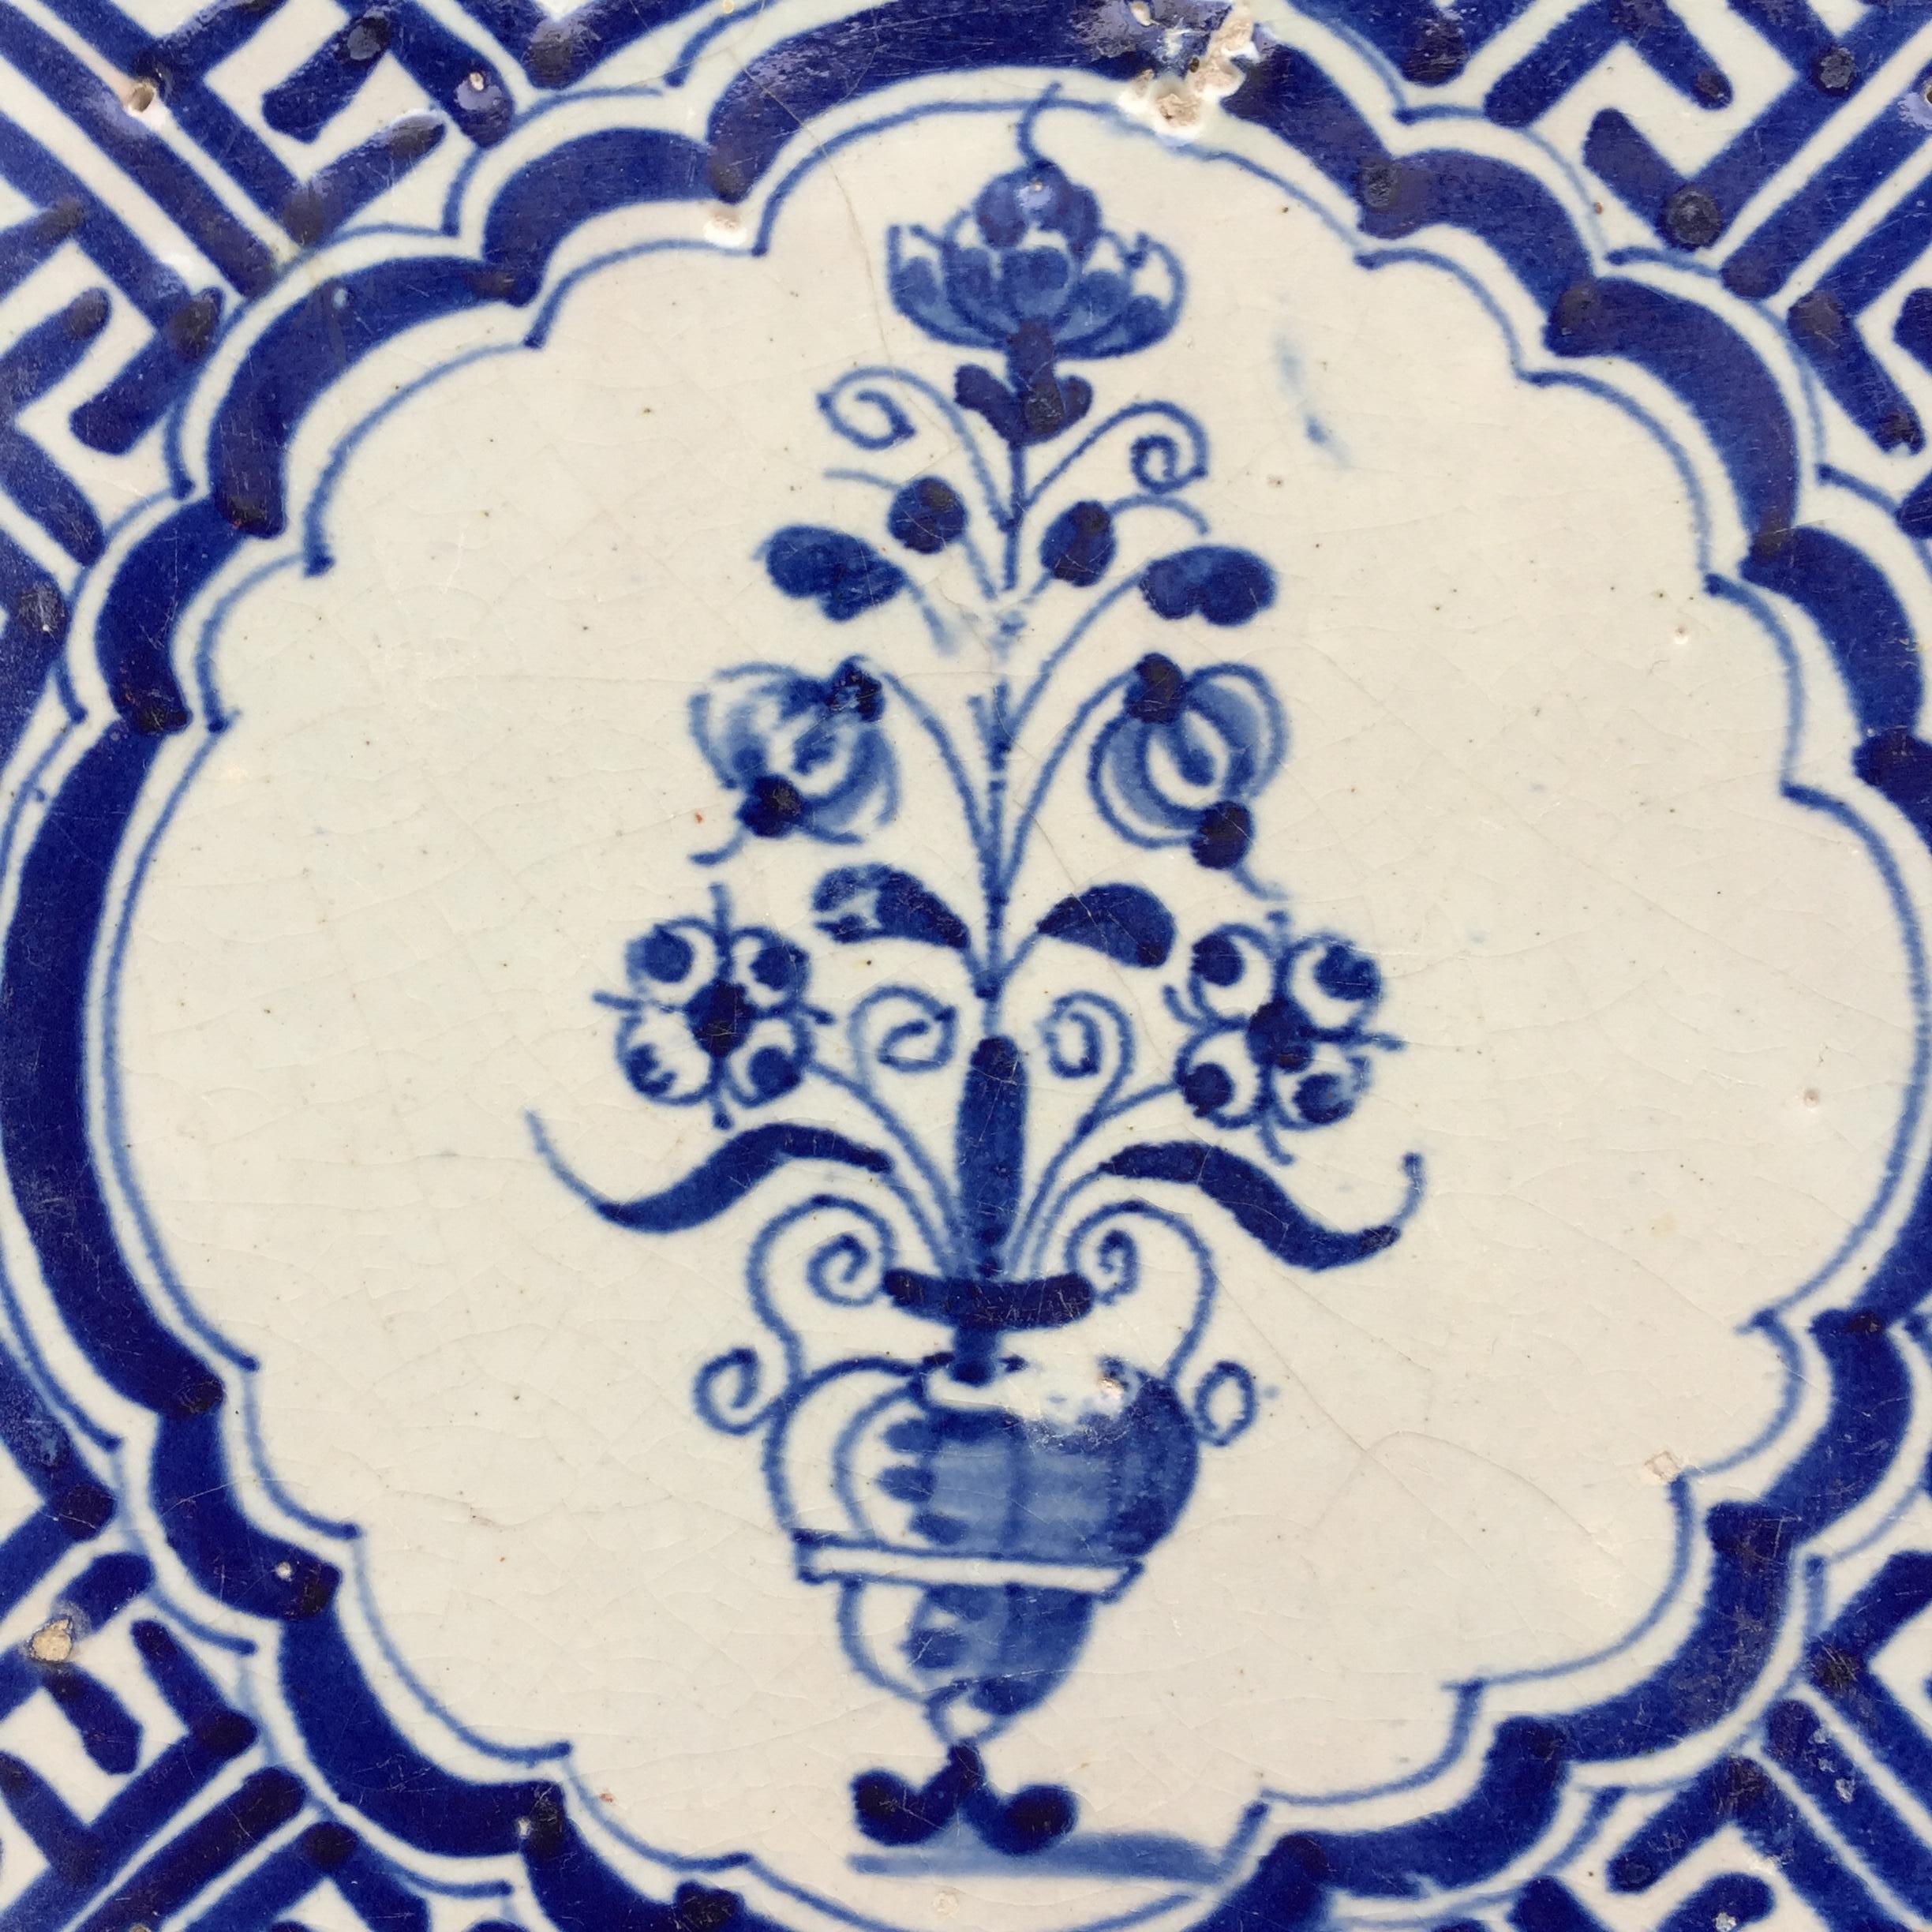 The Netherlands
Circa 1620 – 1640

A blue and white Dutch tile with the decoration of a vase with flowers.
The scene is painted within a cartouche with a Wanli corner design, inspired by the Chinese porcelain from the Wanli period.
Wonderful glaze